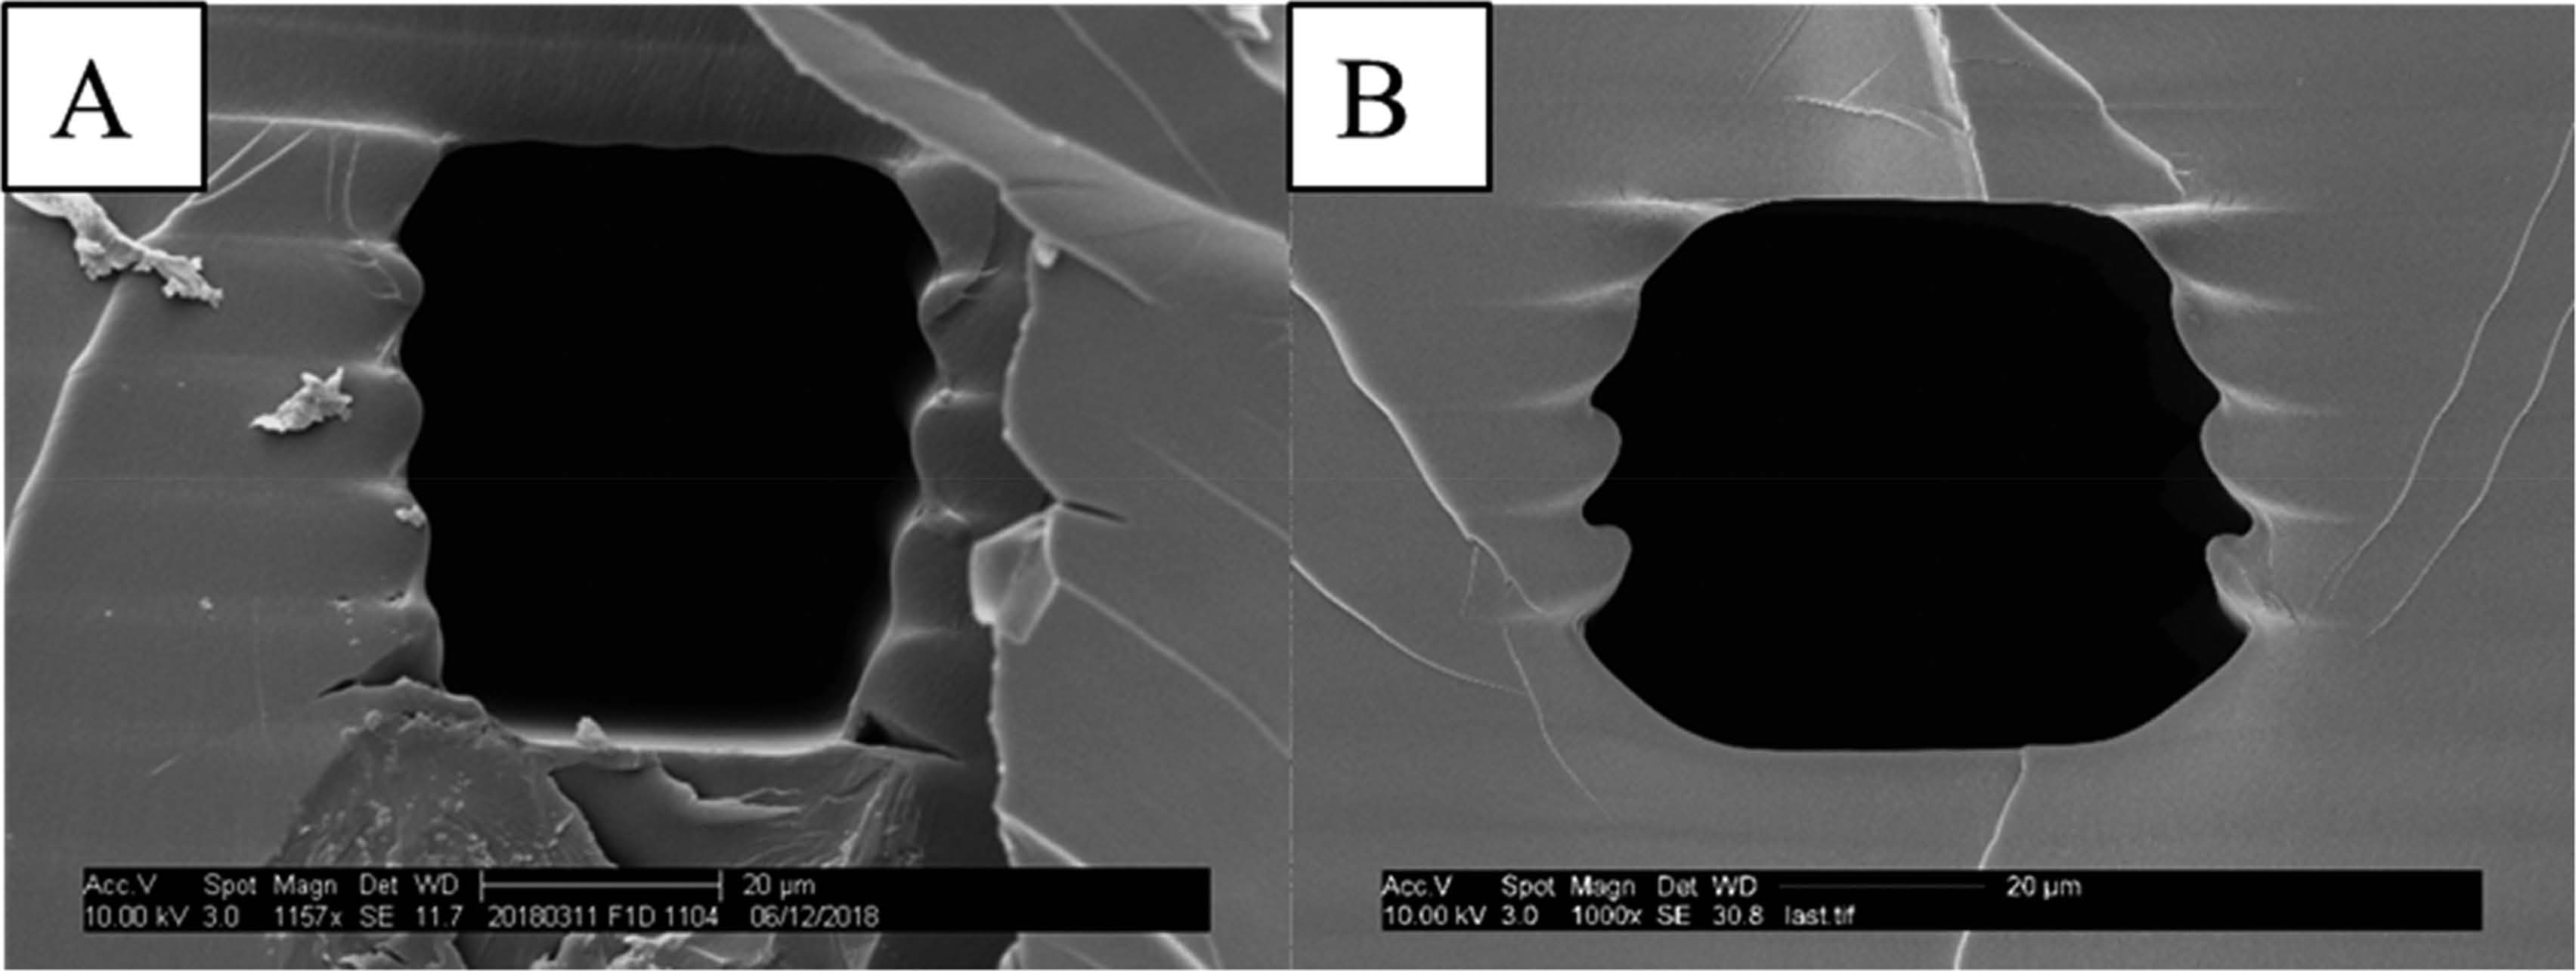 The photo shows two electron microscope images of channels, one very symmetrical and clean, the other rougher and not symmetrical